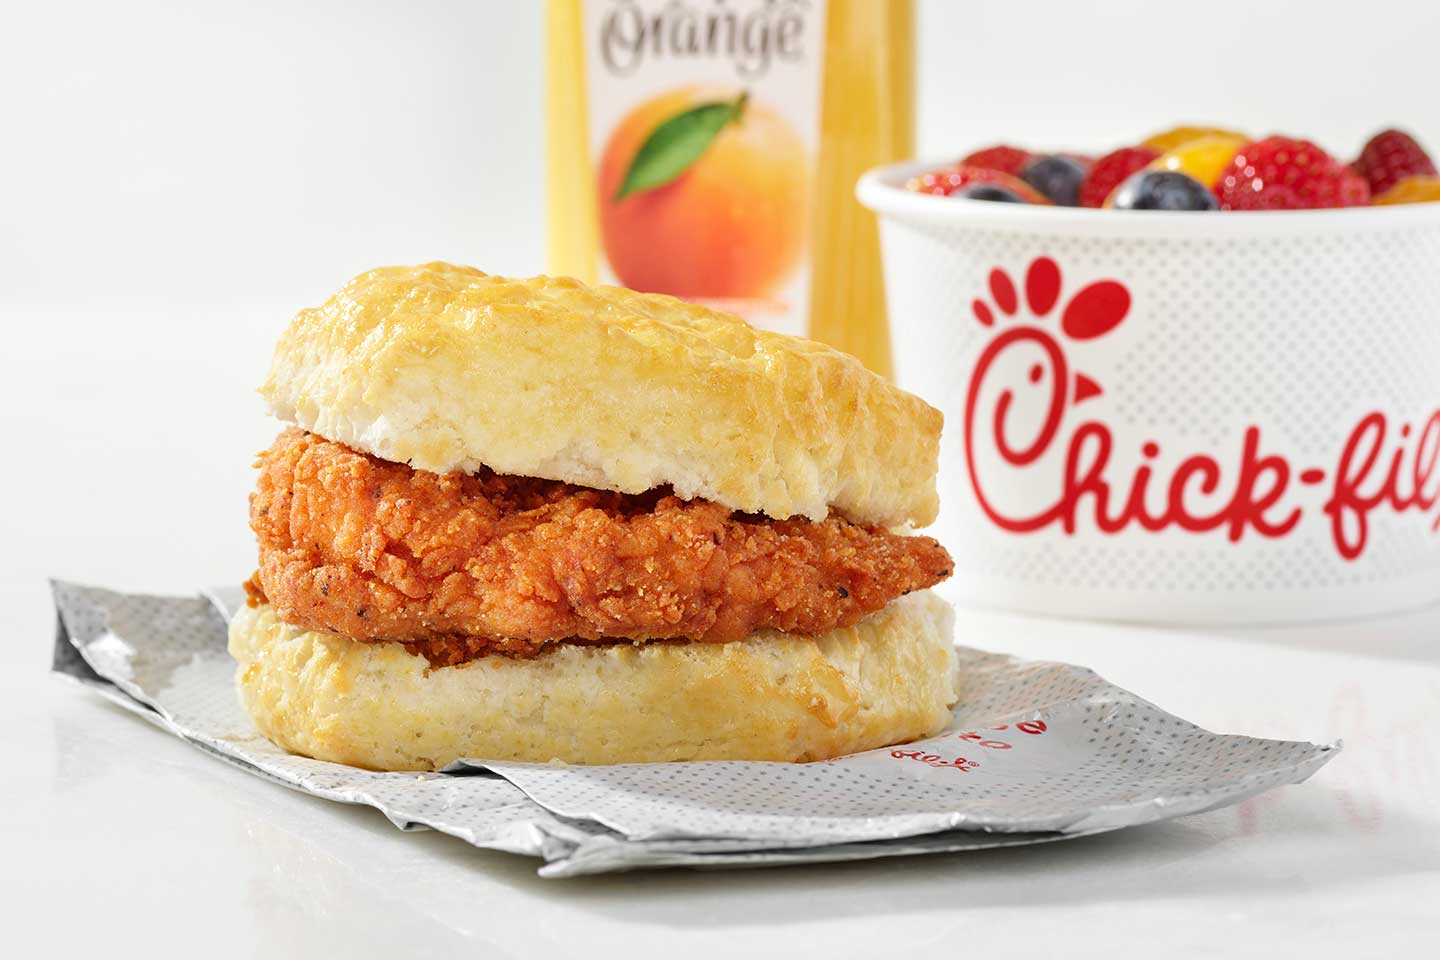 The Spicy Chicken Biscuit is made with Chick-fil-A’s signature boneless chicken breast, seasoned with a spicy blend of peppers, and served on a freshly baked buttermilk biscuit.